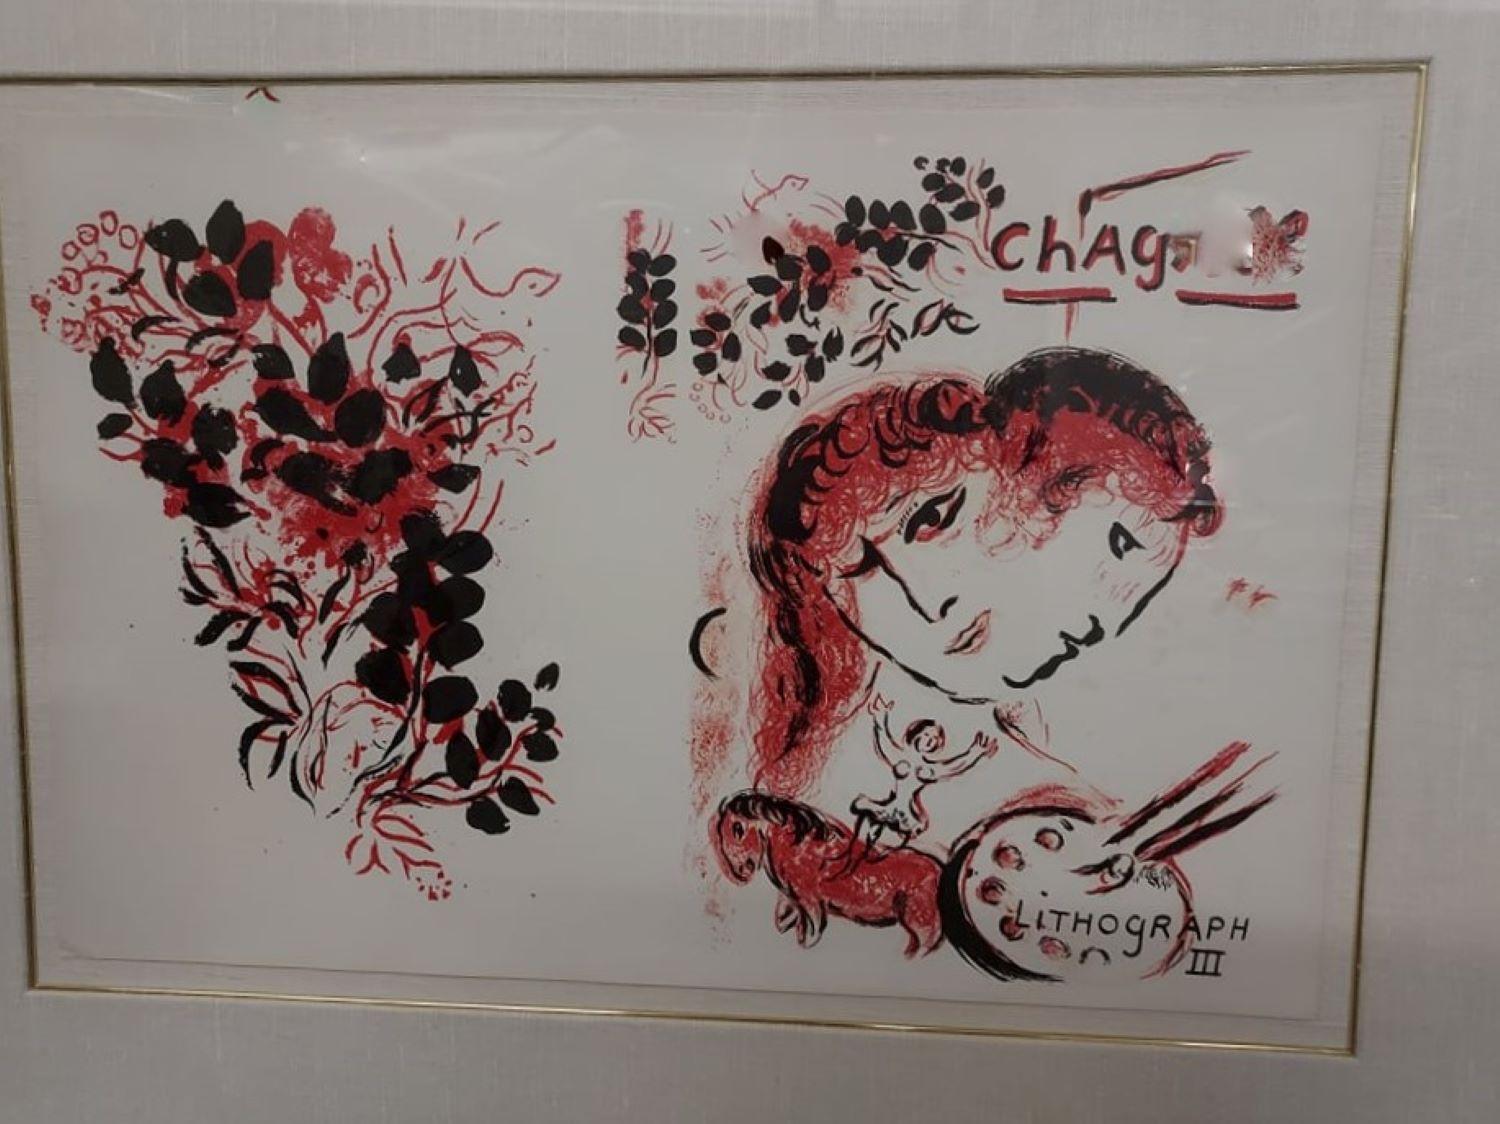 1969 After Marc Chagall 'Chagall Lithographe III (1962-1968)' Modernism 1969 2